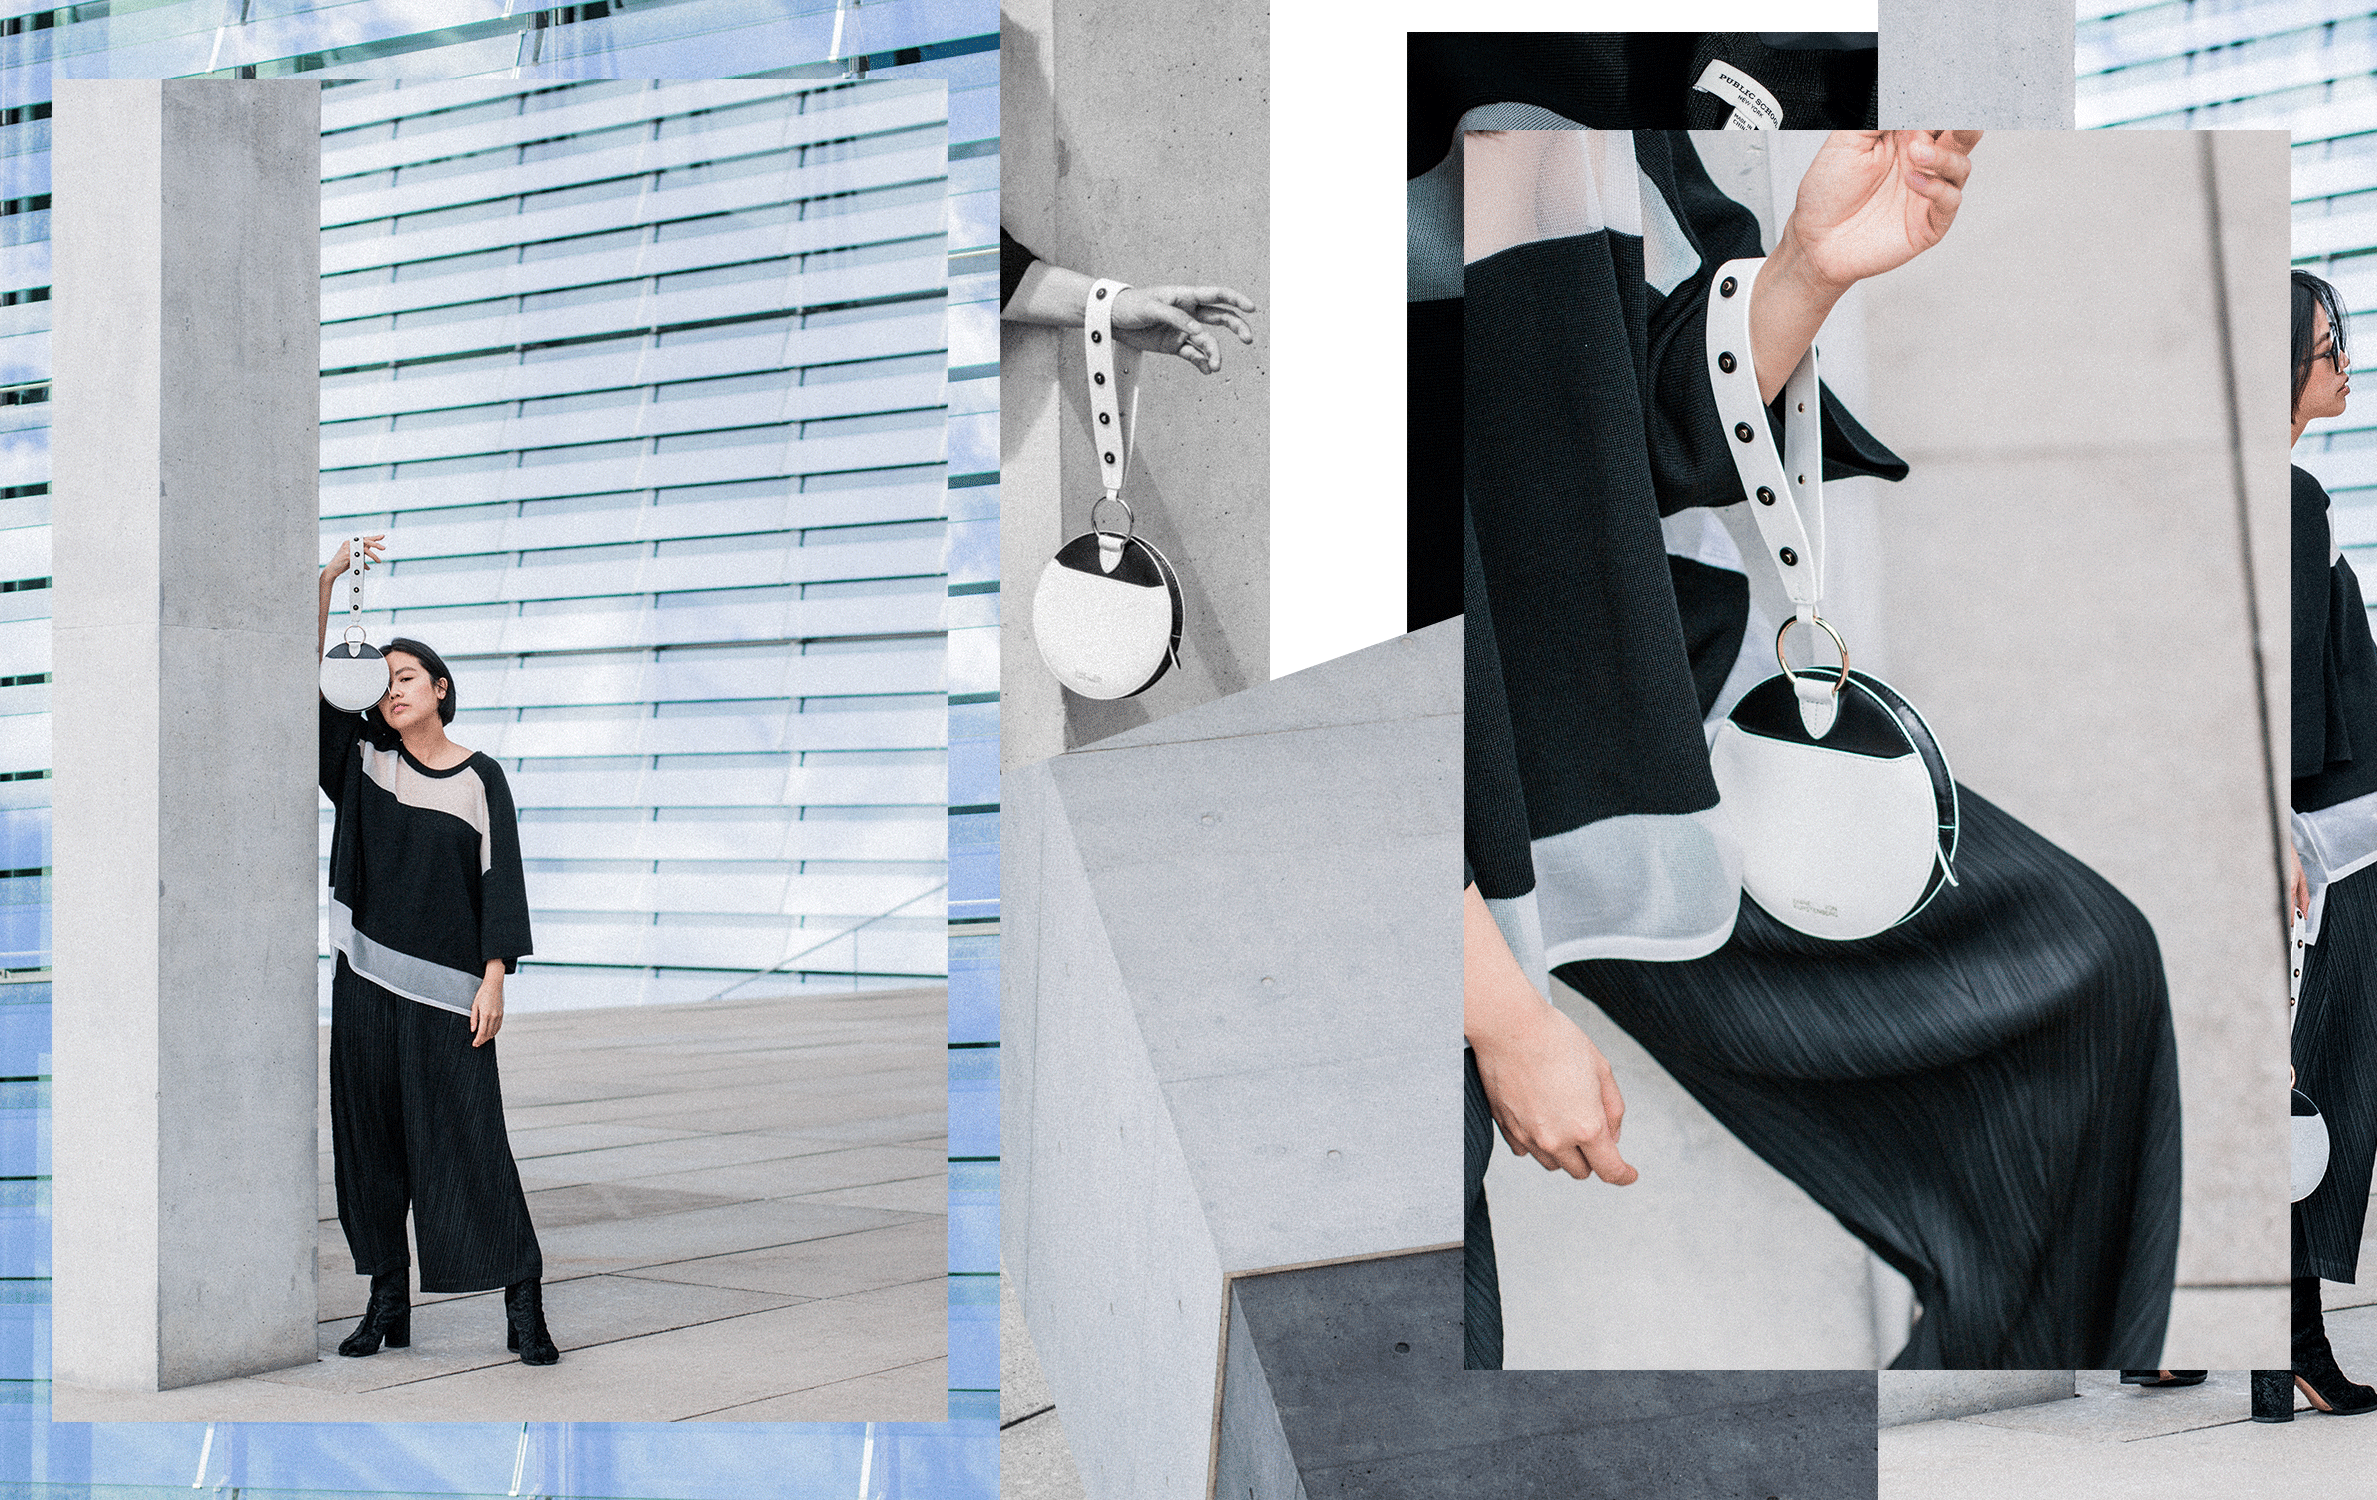 Public School Lati Sweater & Diana von Fuerstenberg Studded Circle Wristlet / All Black and White Look by Alice M. Huynh - Travel, Lifestyle & Luxury Style Blog / IheartAlice.com